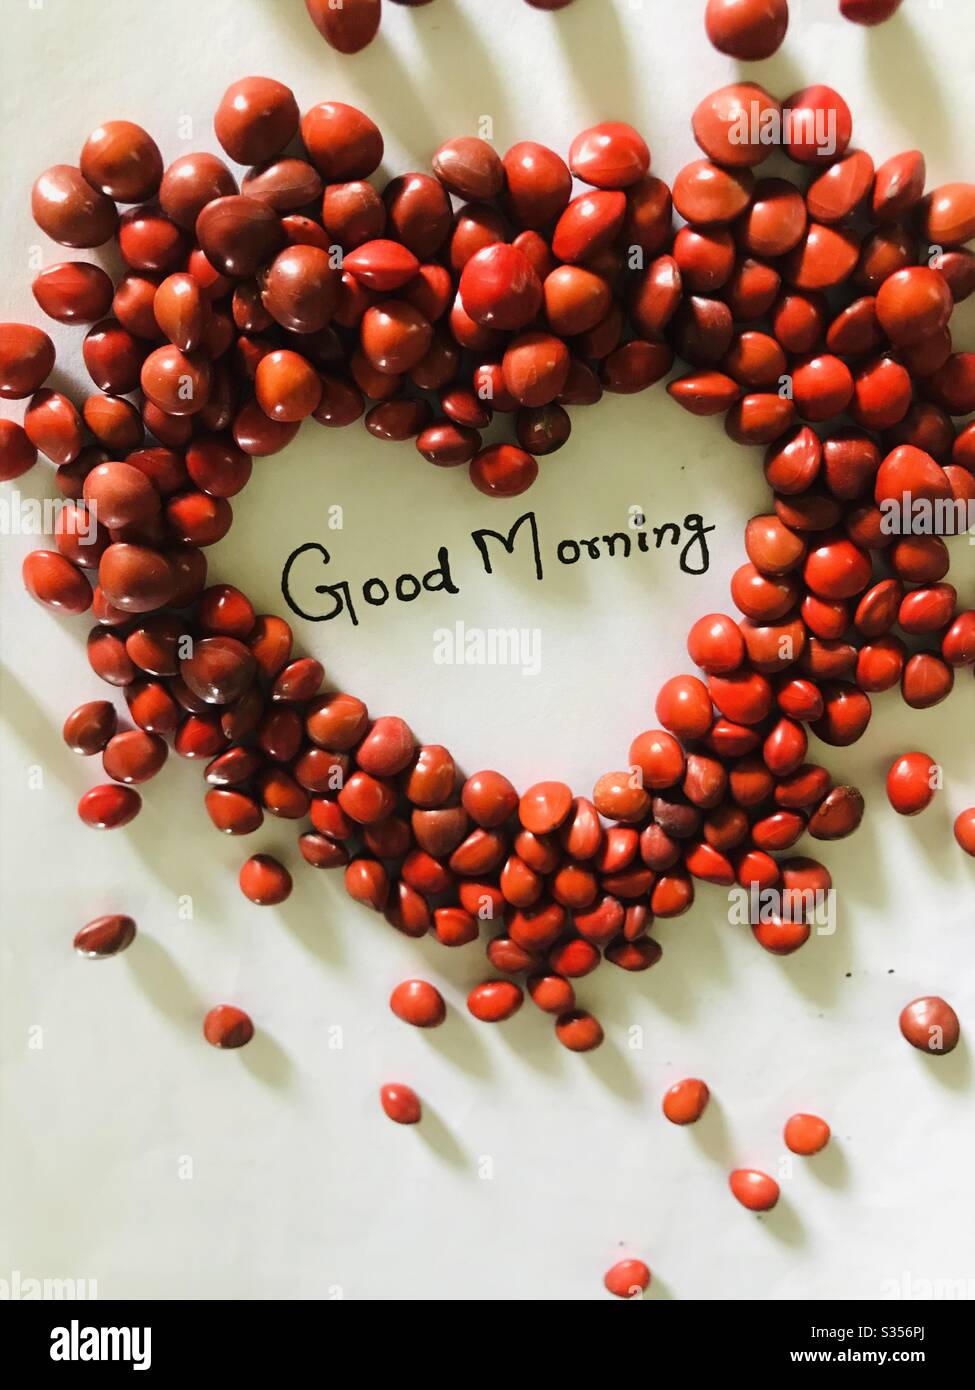 Adenanthera red beads in shape of heart with words Good Morning hand written, with white surface background. Morning message for friends,Manjadikuru in malayalam, dramatic look with natural sun shades Stock Photo